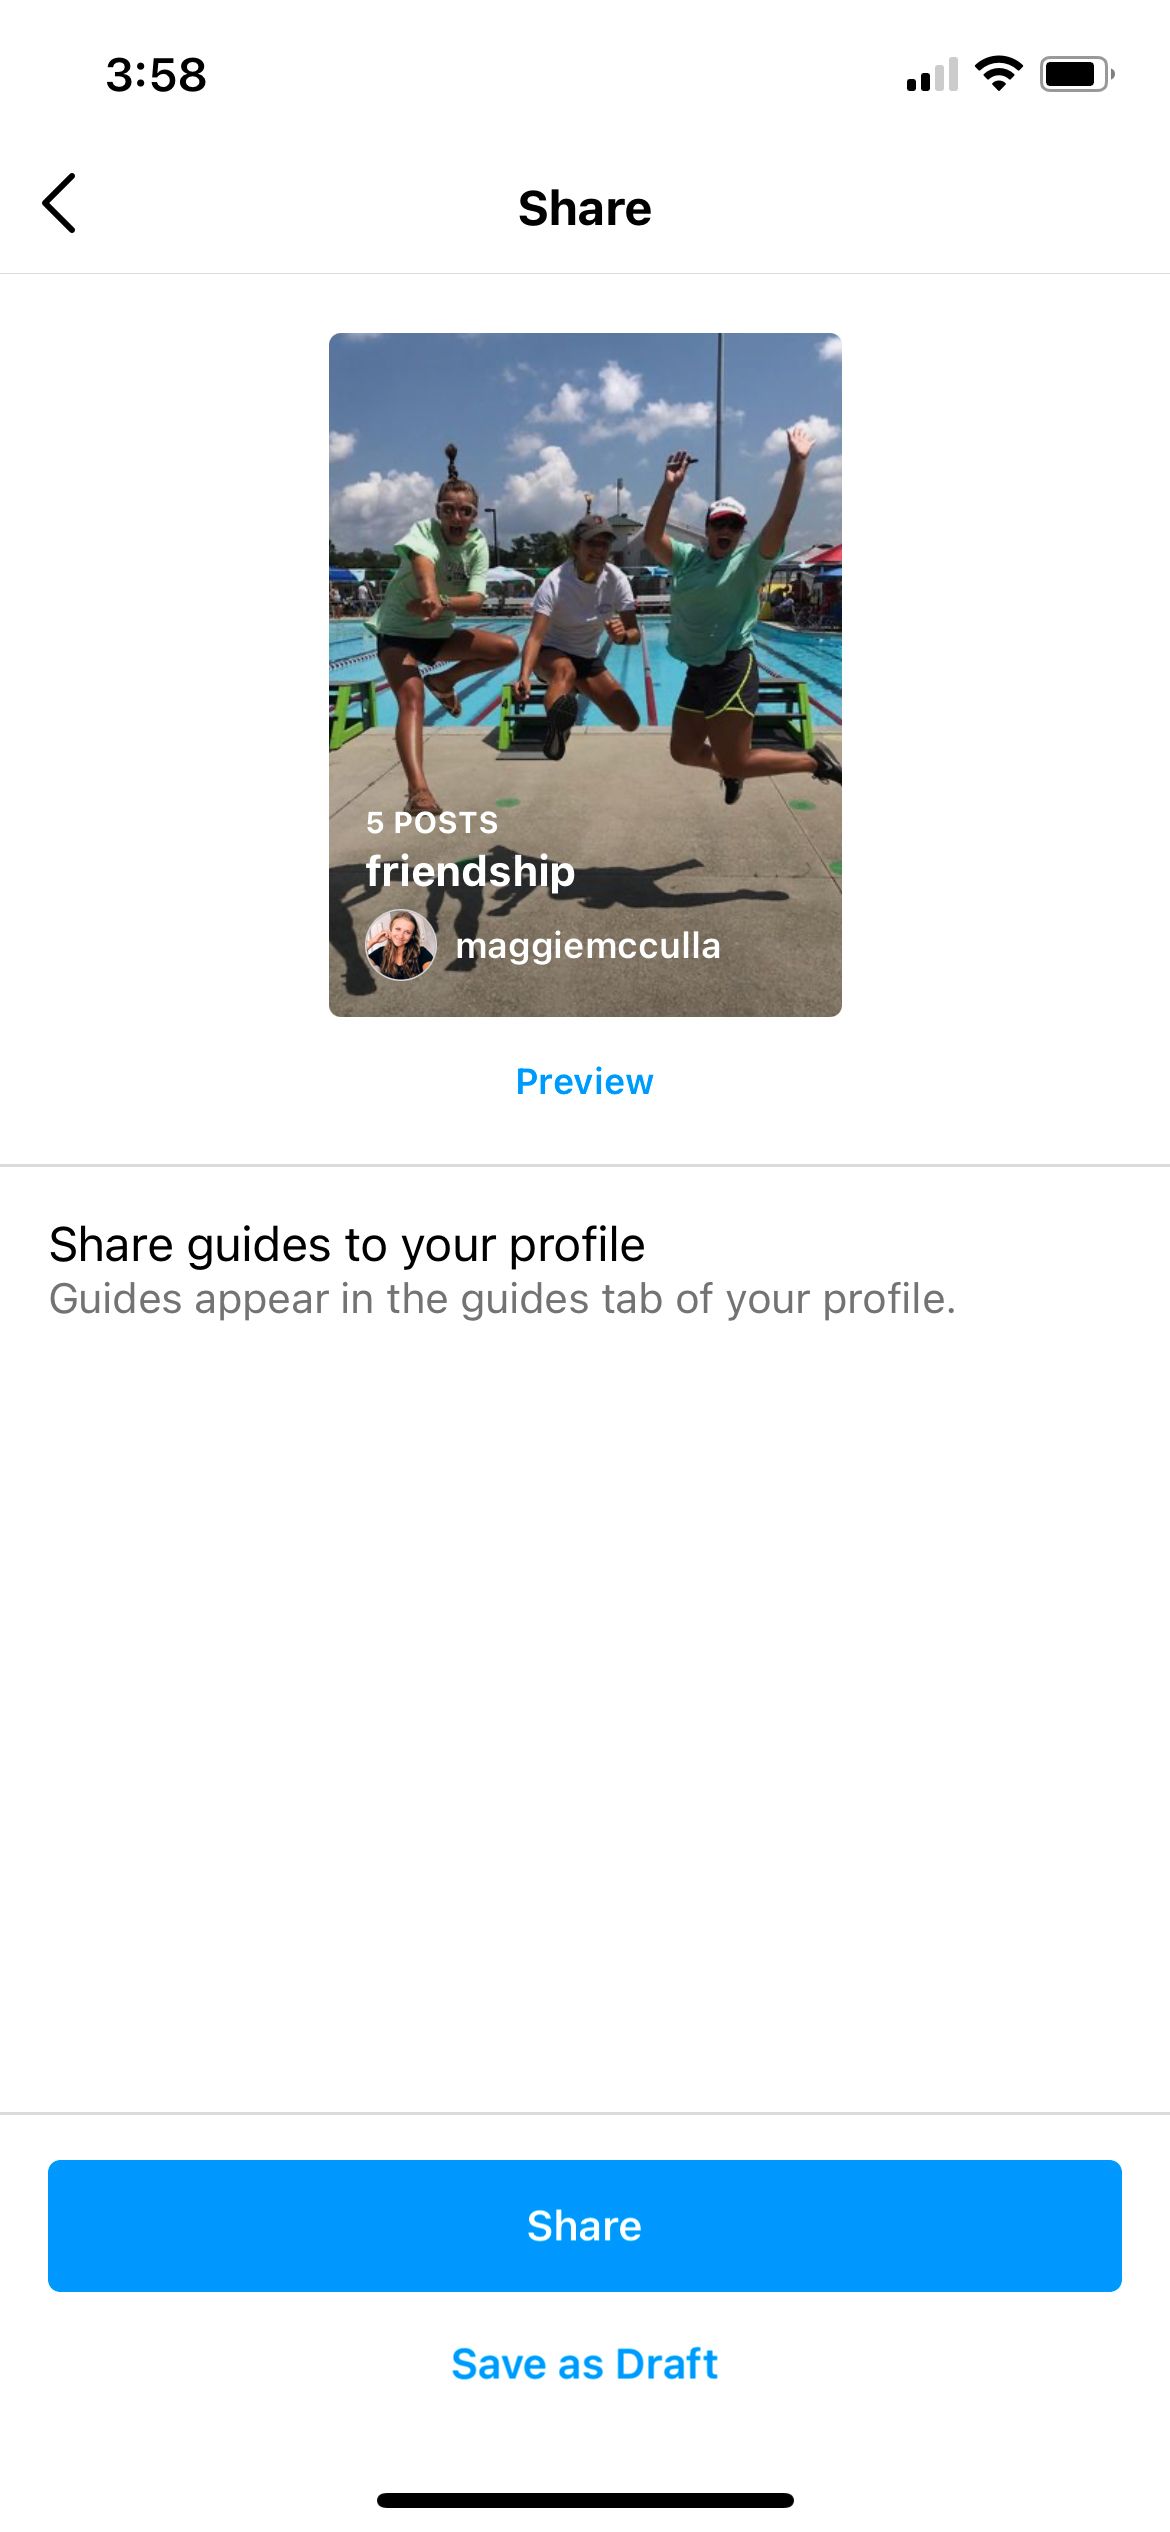 preview screen of Instagram guide